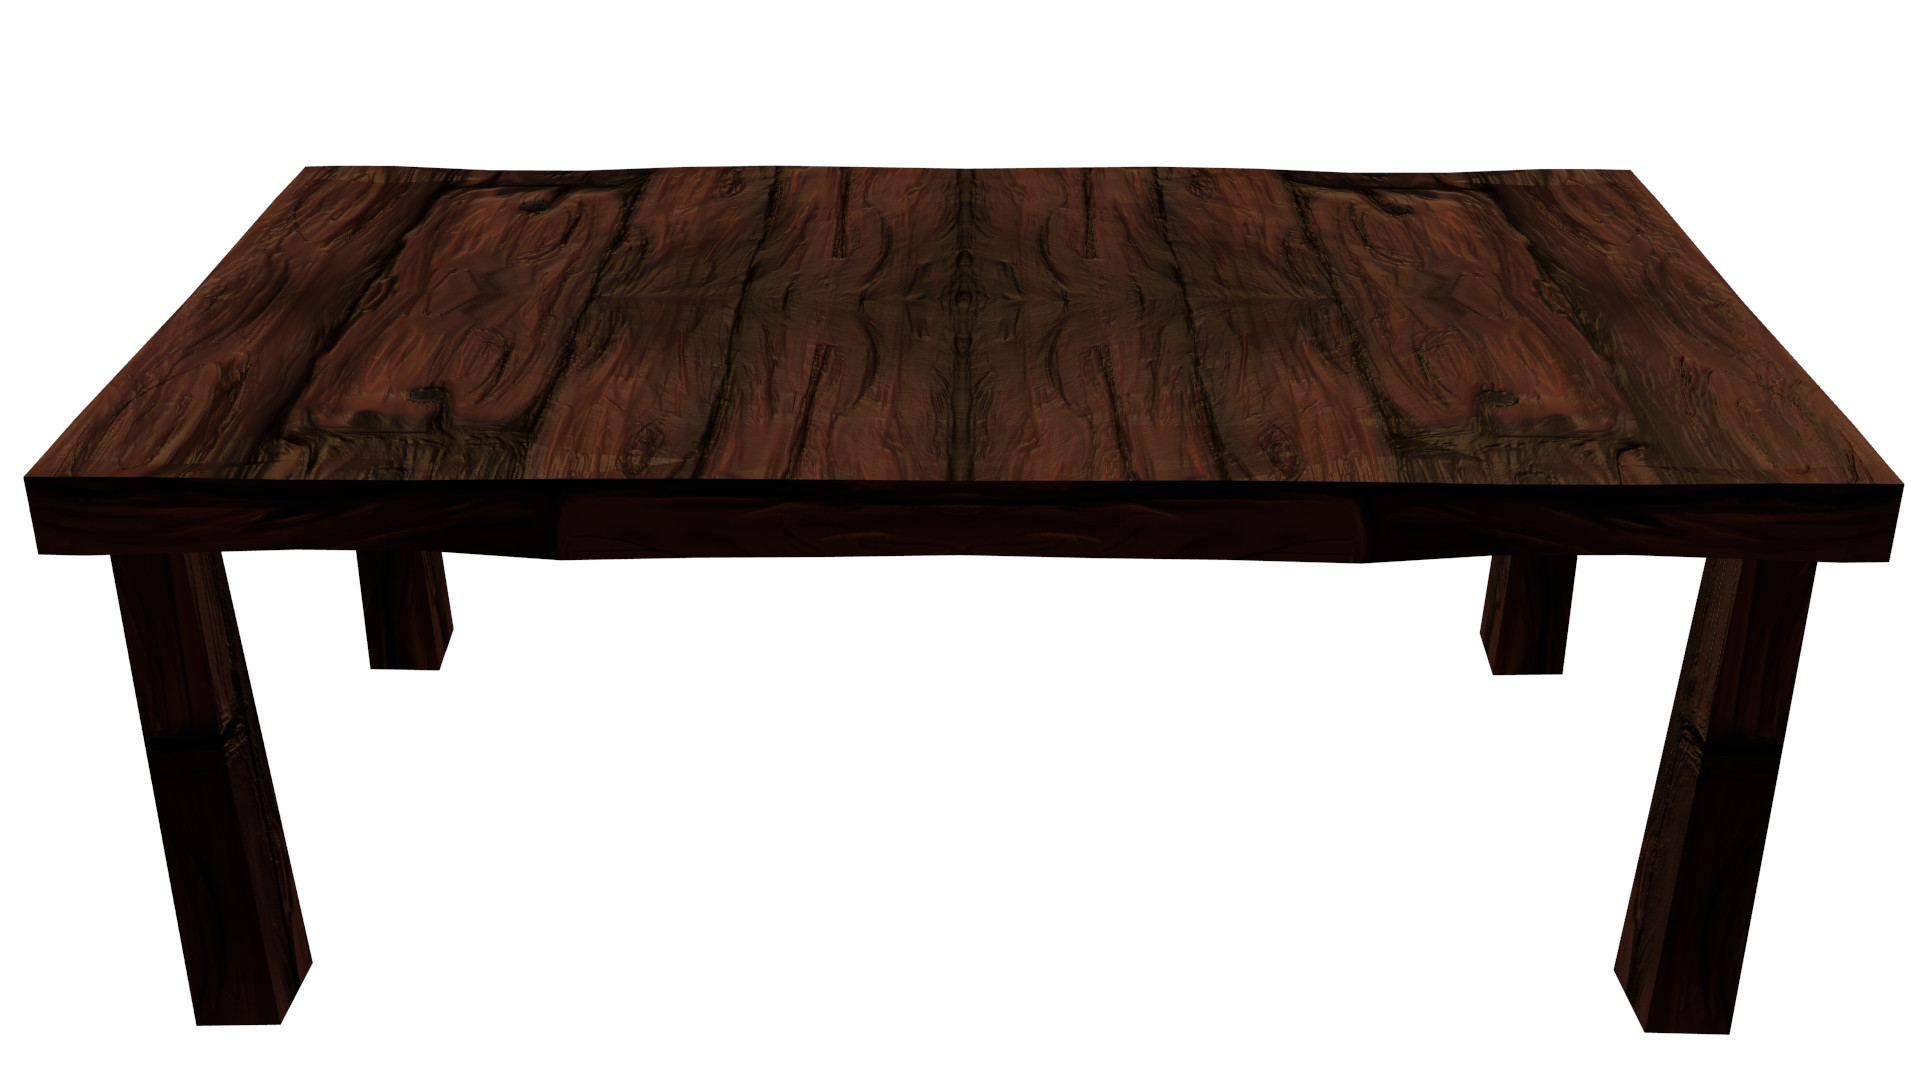 Wooden Table Png